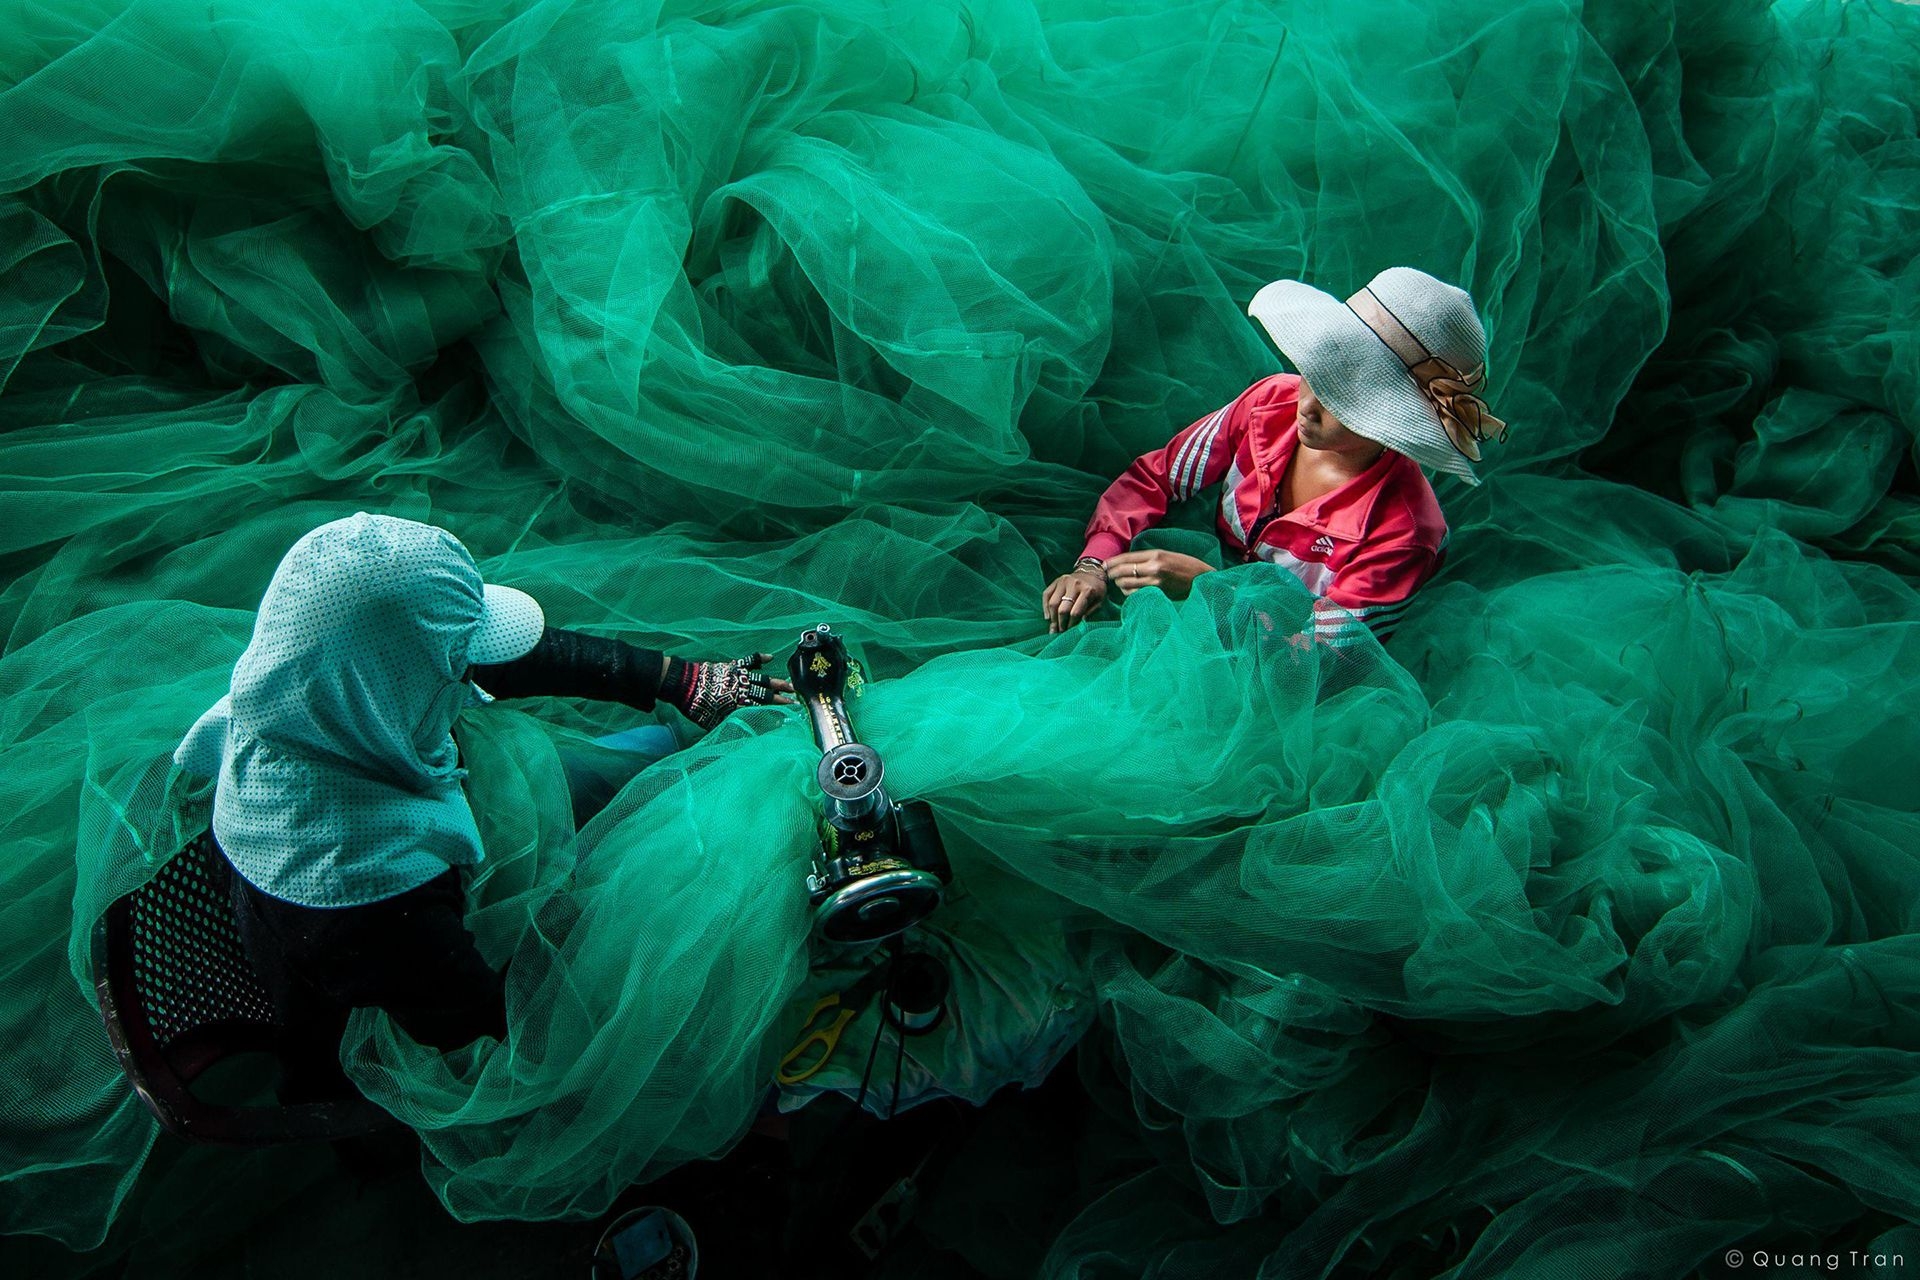 Photograph by Quang Tran, National Geographic Your Shot